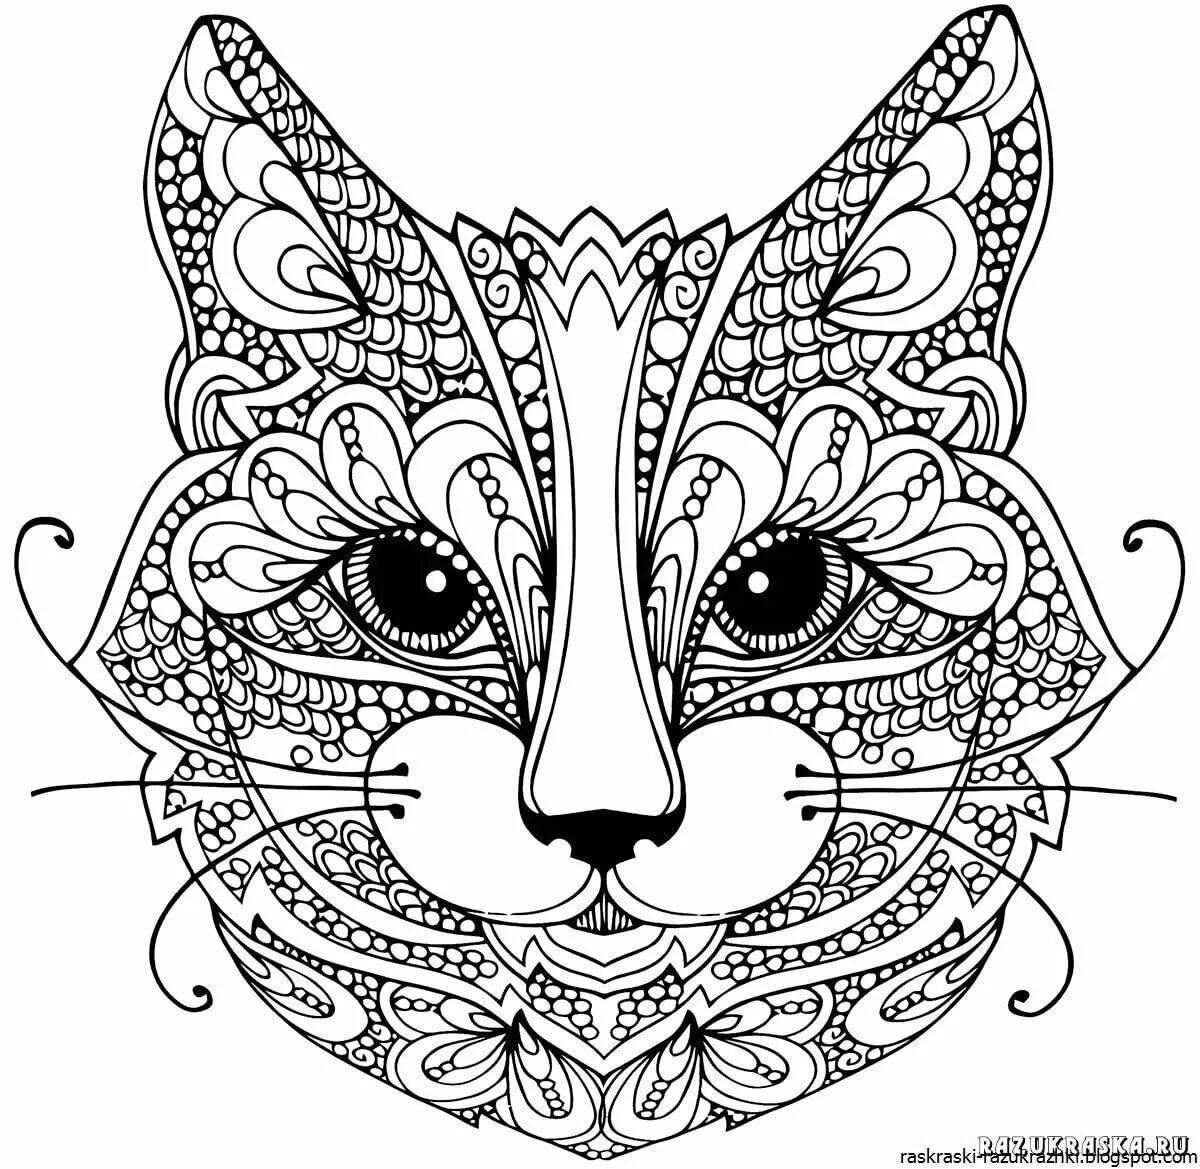 Hypnotic anti-stress coloring book for cat girls